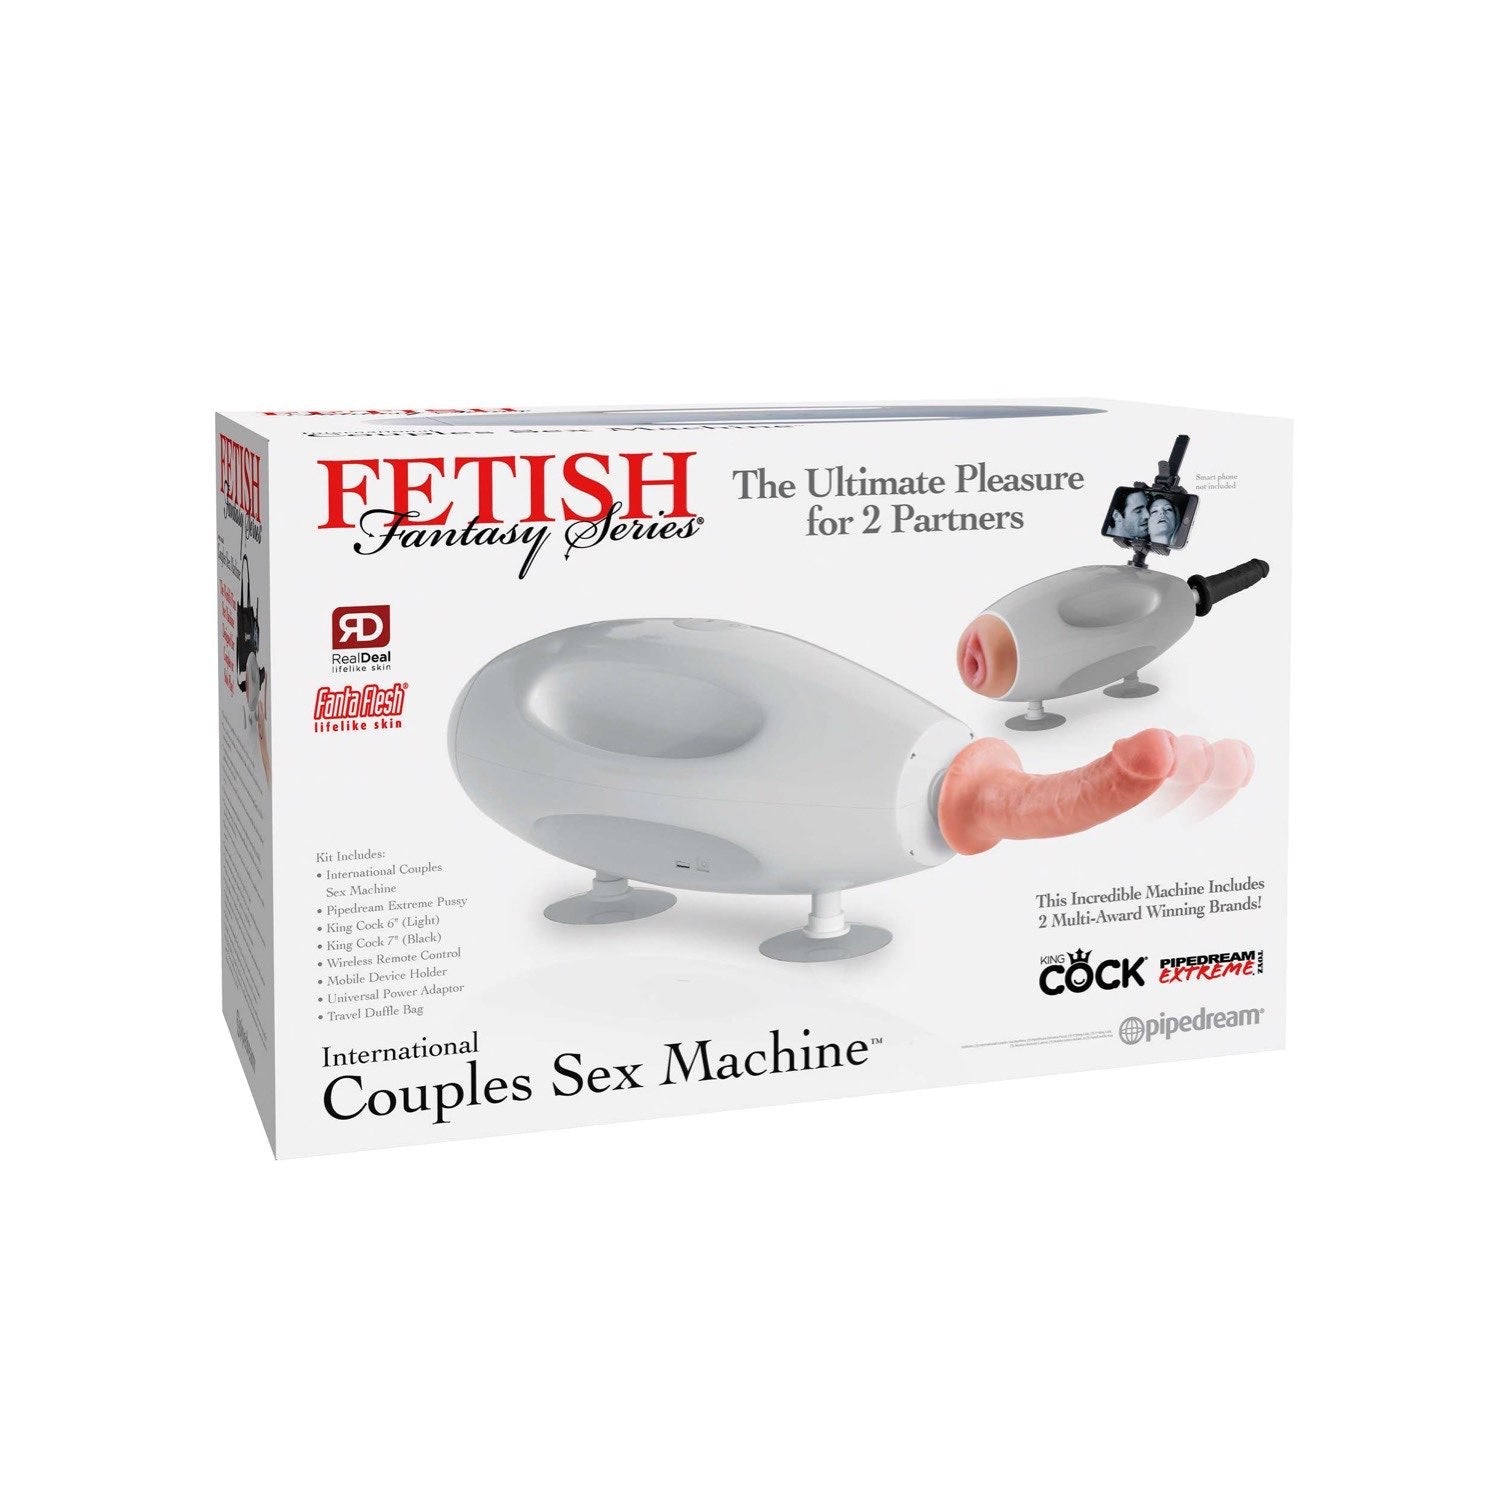 Fetish Fantasy Series International Couples Sex Machine - Powered Stroker and Thruster Machine by Pipedream